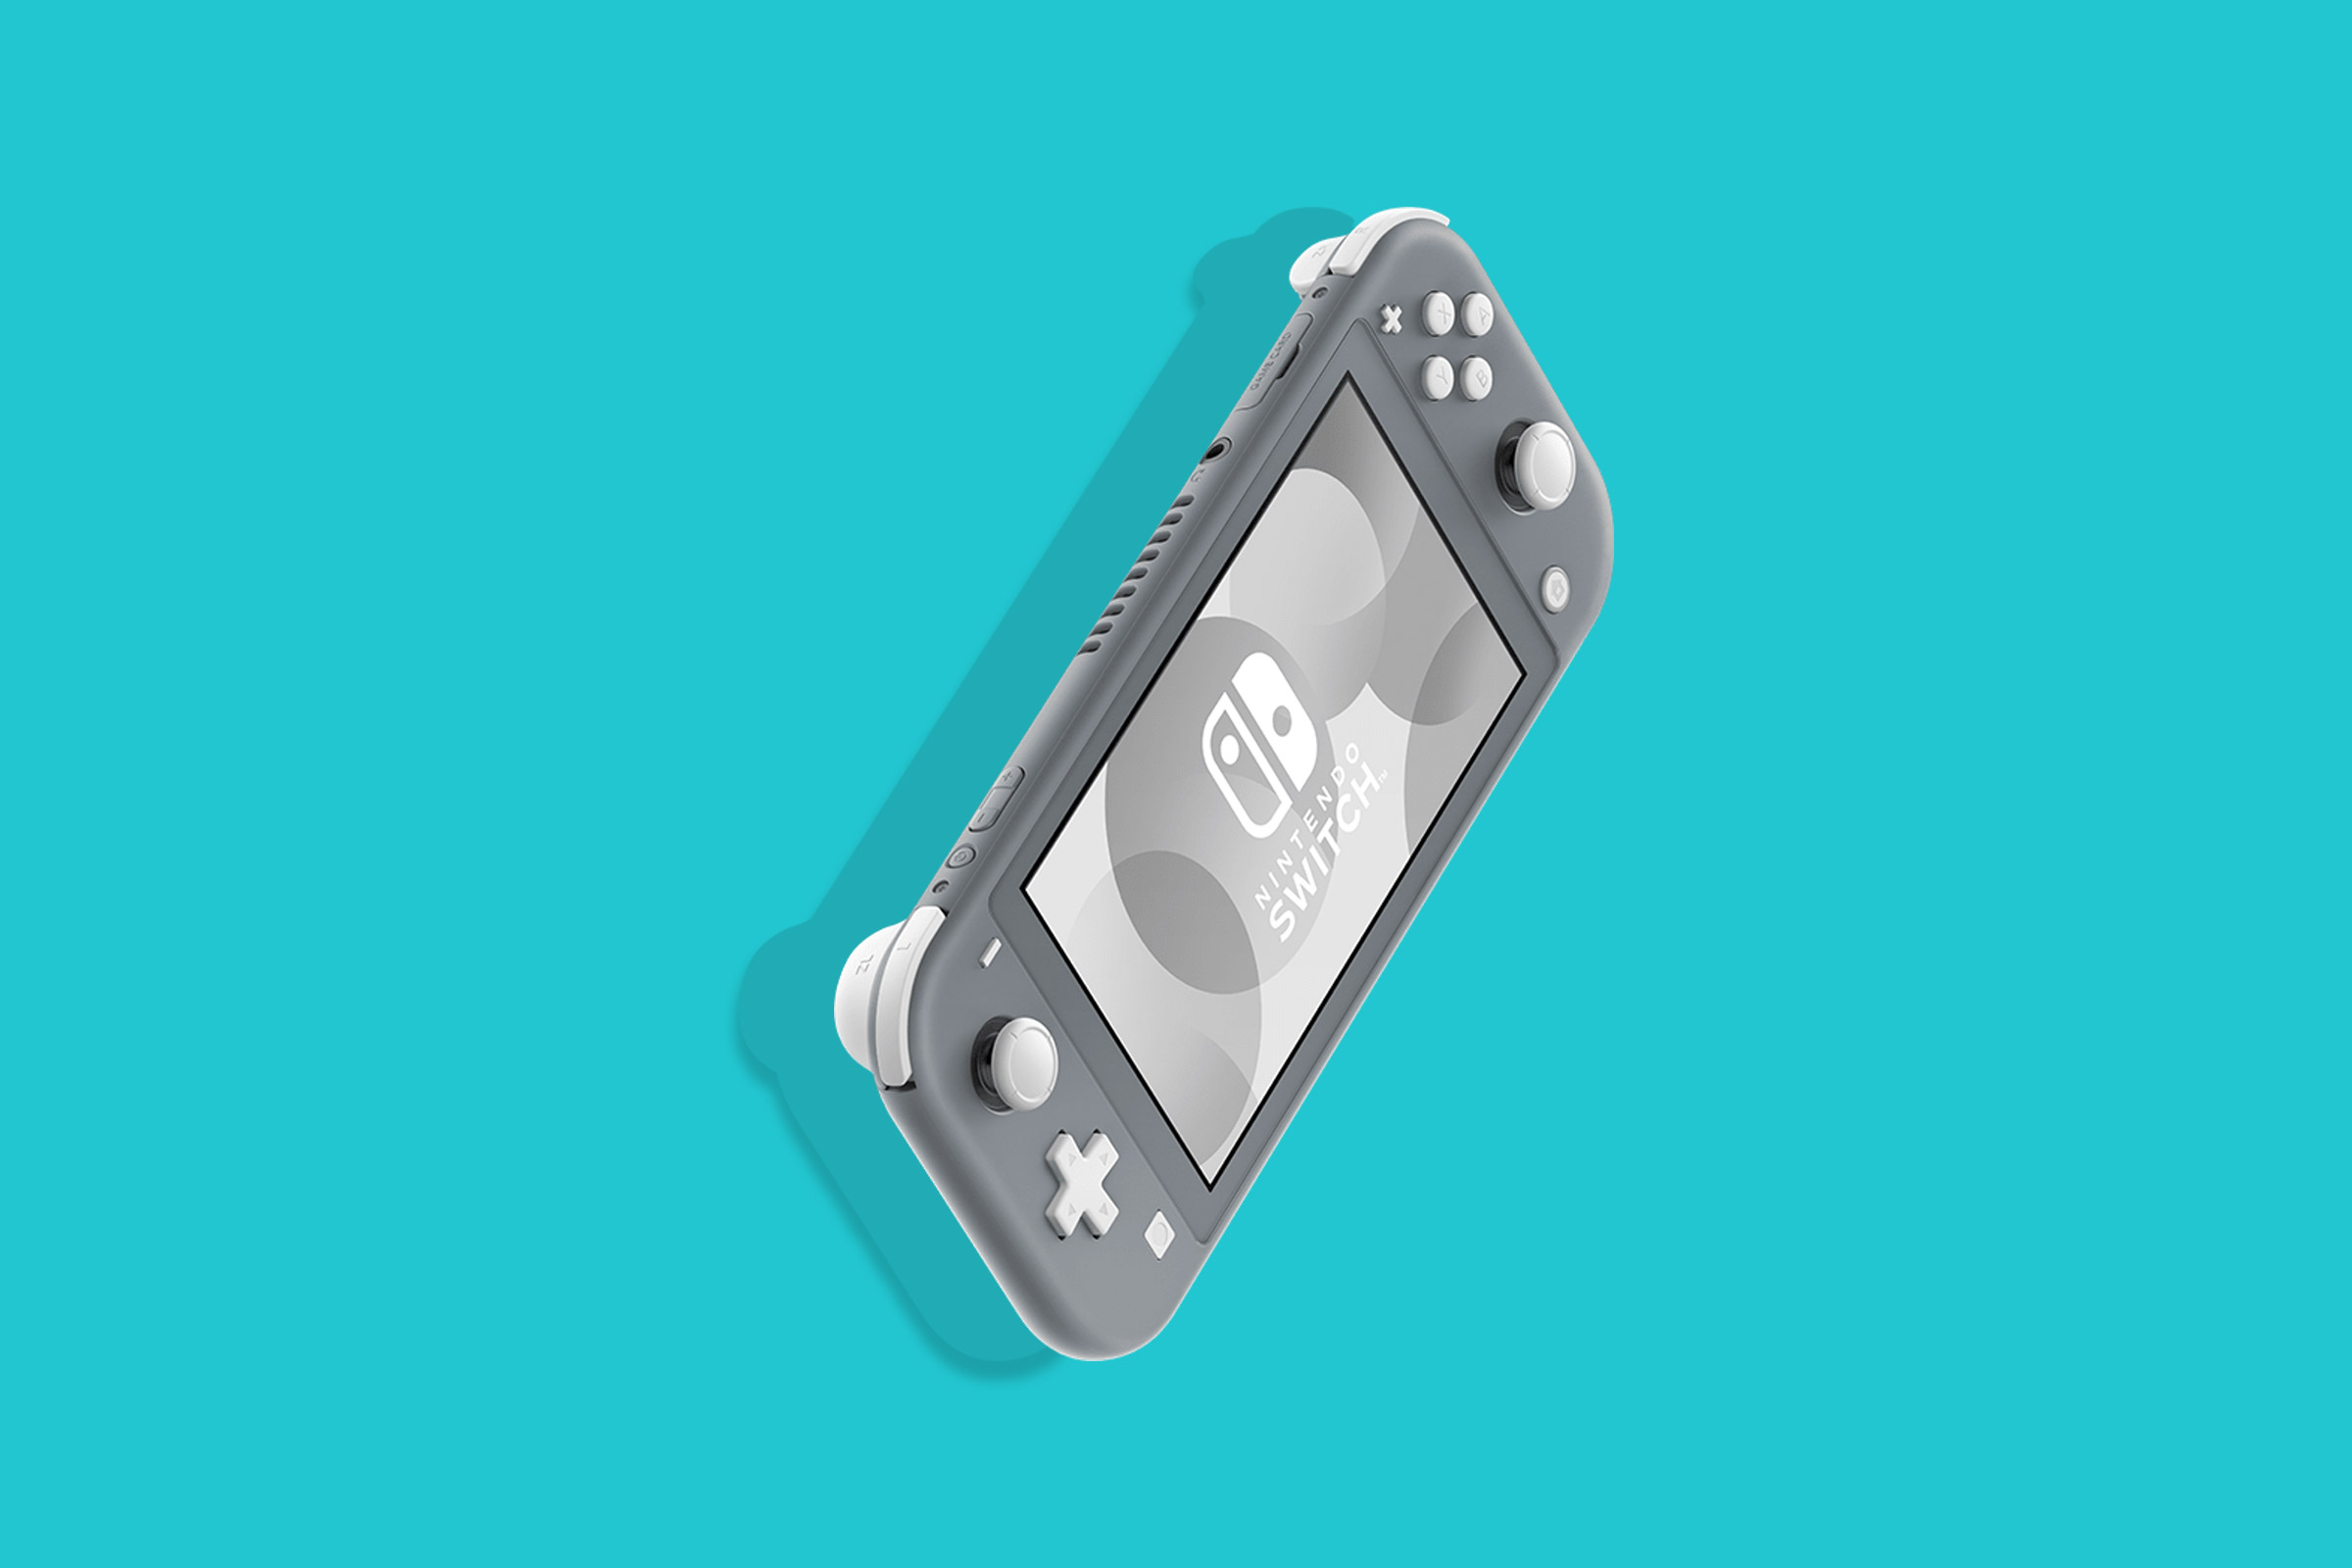 does amiibo work on switch lite